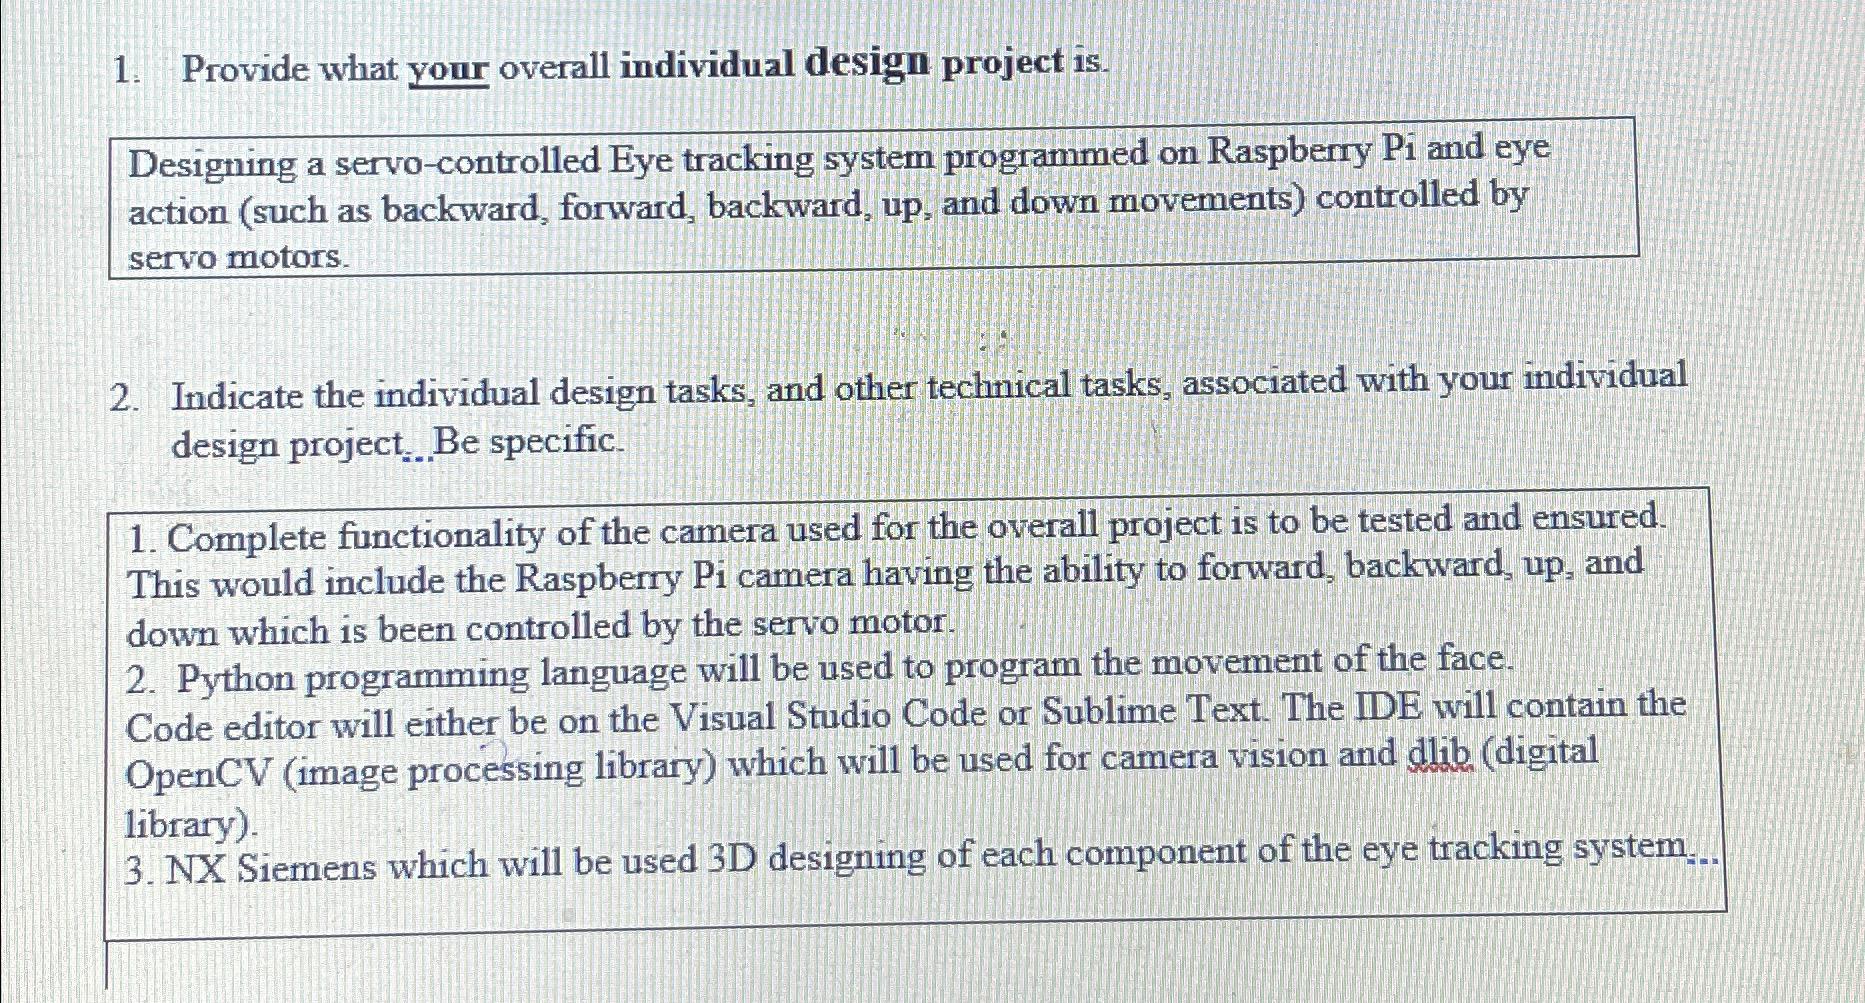 1. Provide what your overall individual design project is. Designing a servo-controlled Eye tracking system